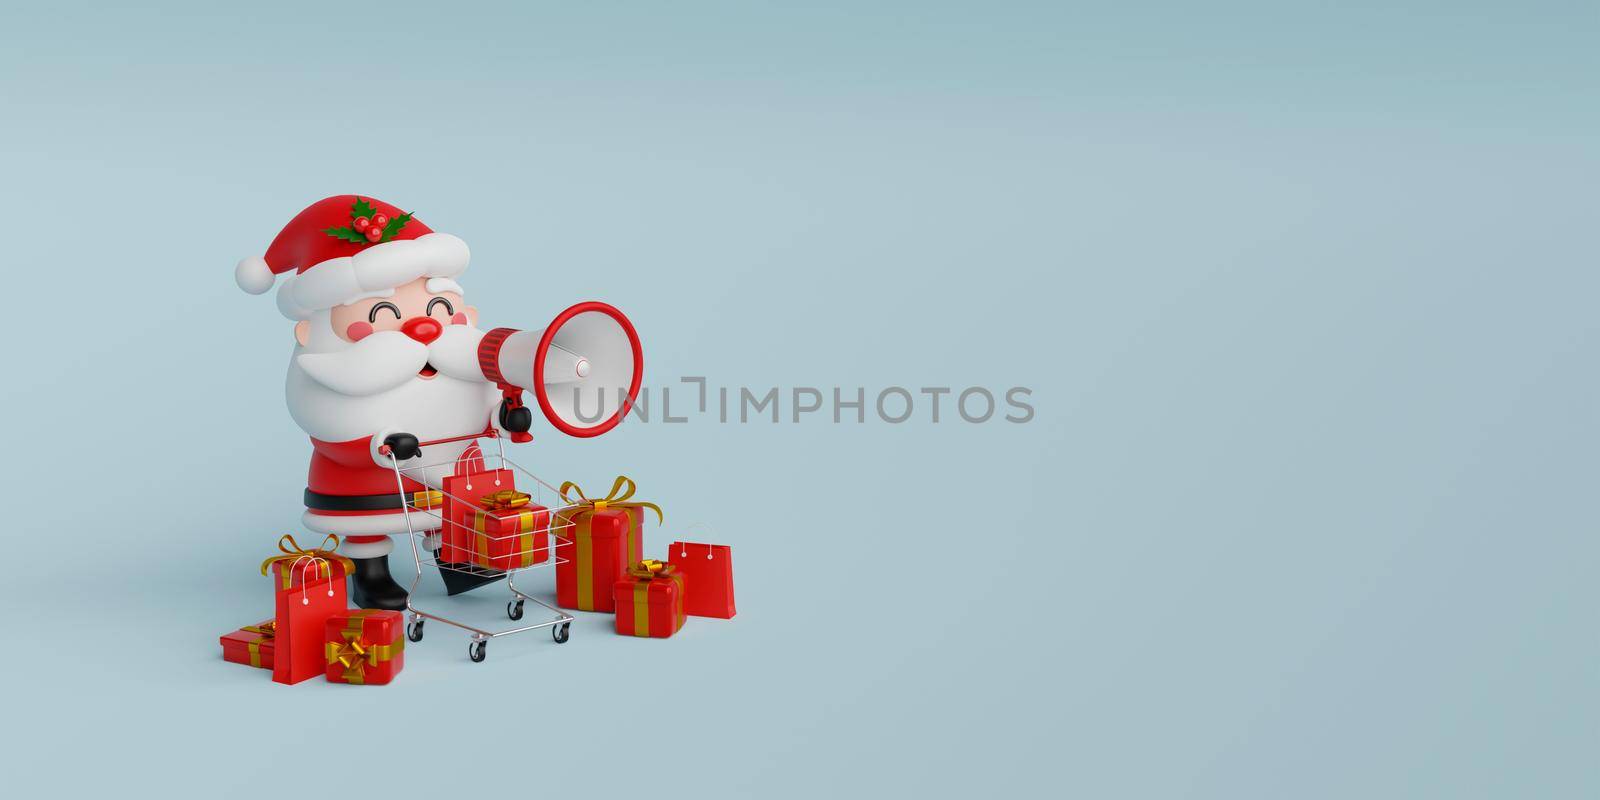 Christmas shopping banner, Santa Claus holding megaphone and shopping cart with Christmas gift on blue background, 3d illustration by nutzchotwarut